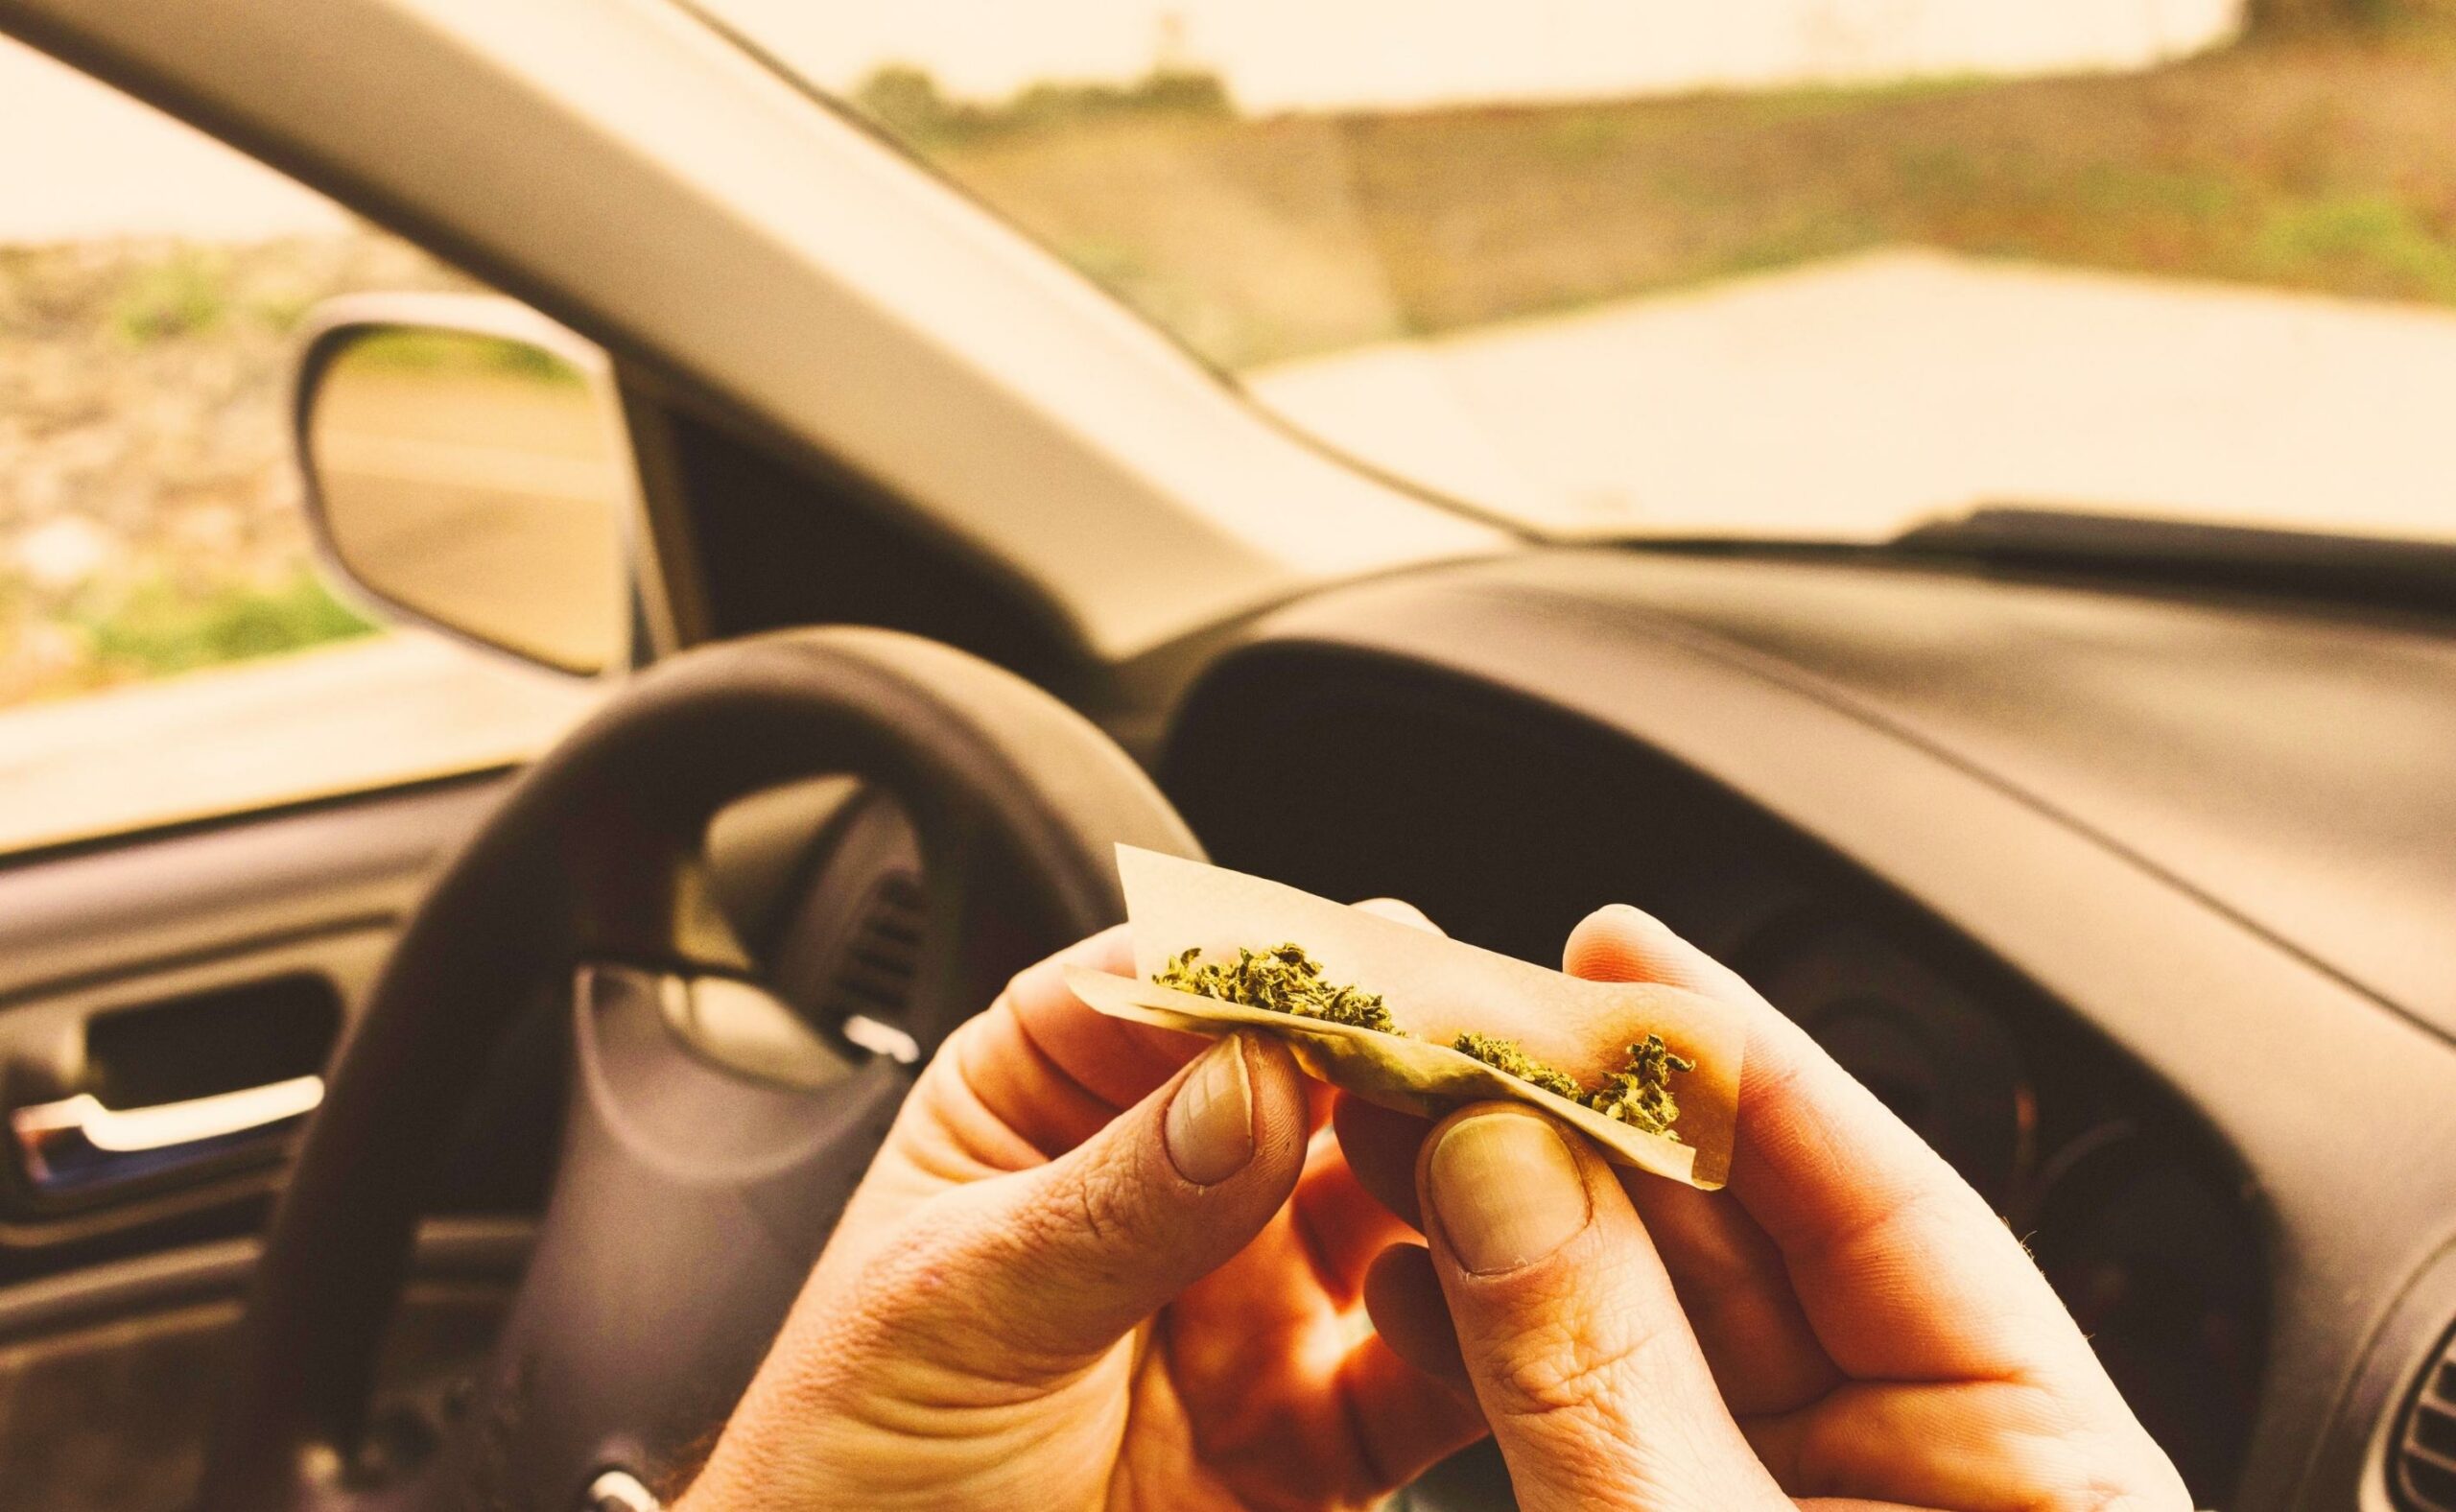 WHAT ARE THE CONSEQUENCES OF DRIVING UNDER THE INFLUENCE OF MARIJUANA